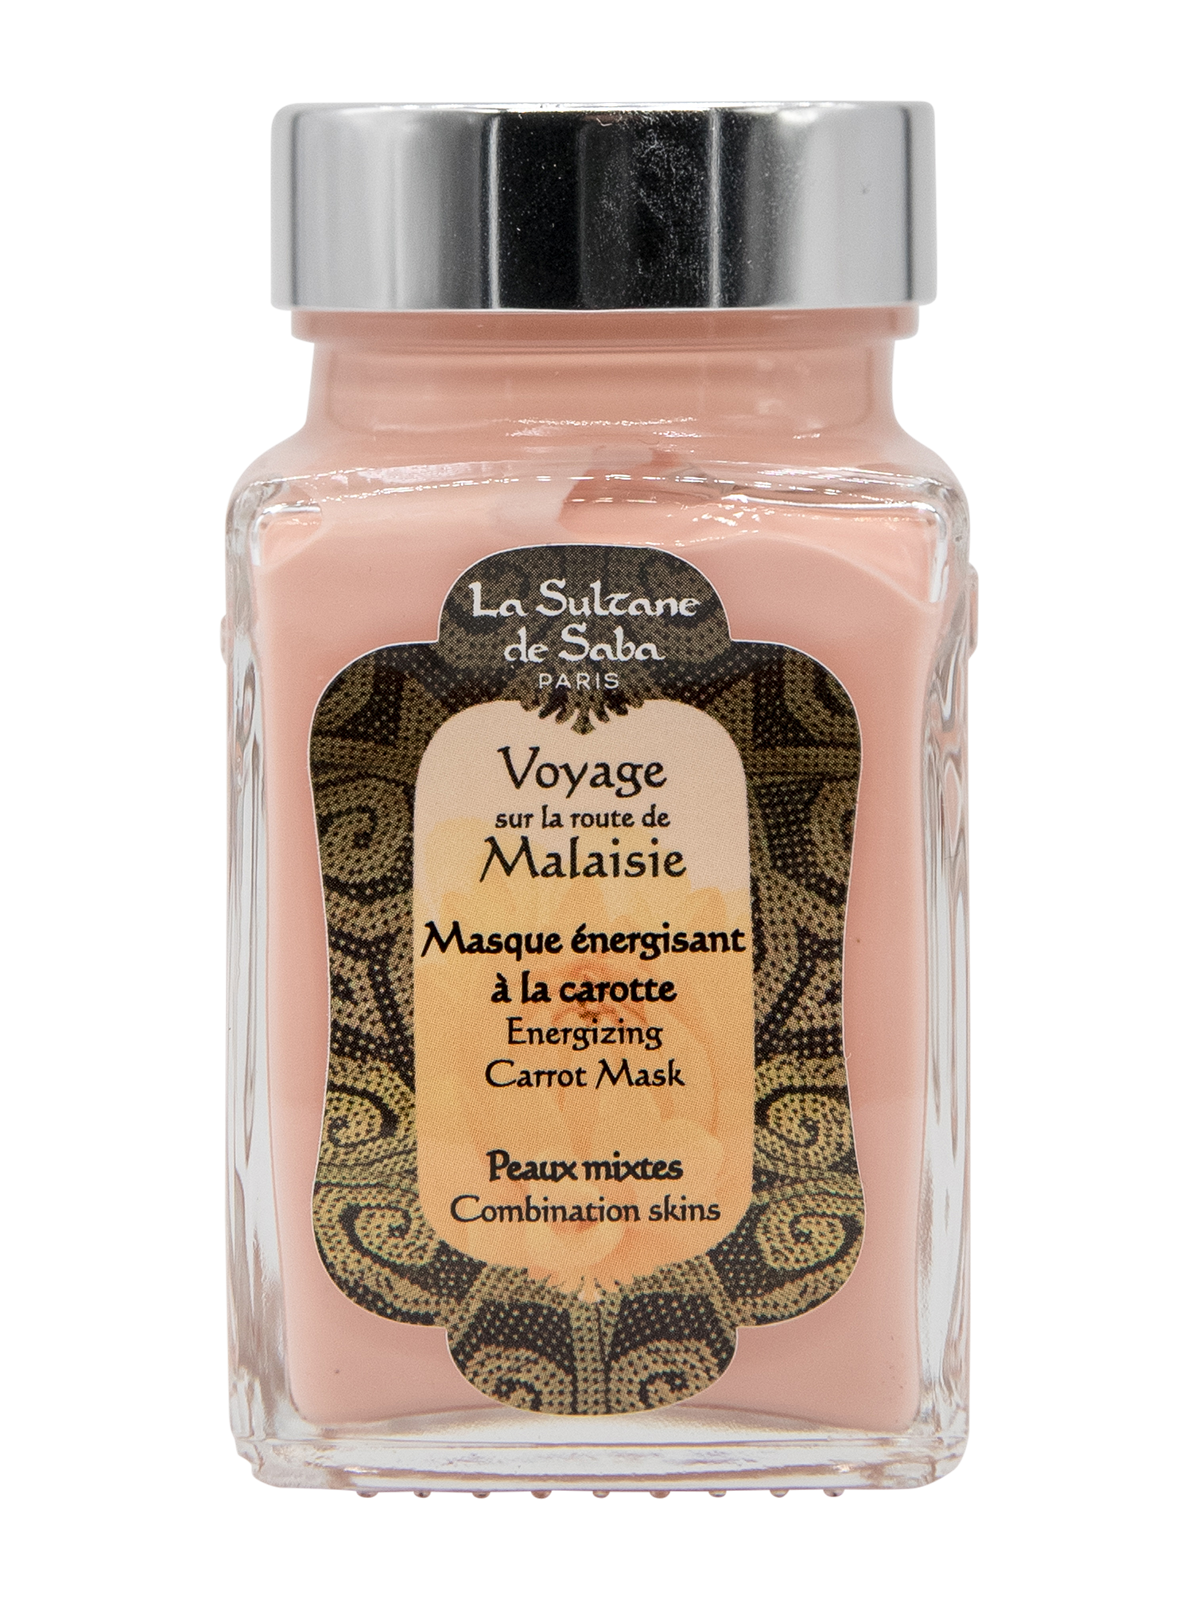 Energizing Carrot Mask - Jasmine and Tropical Flowers Fragrance / offer